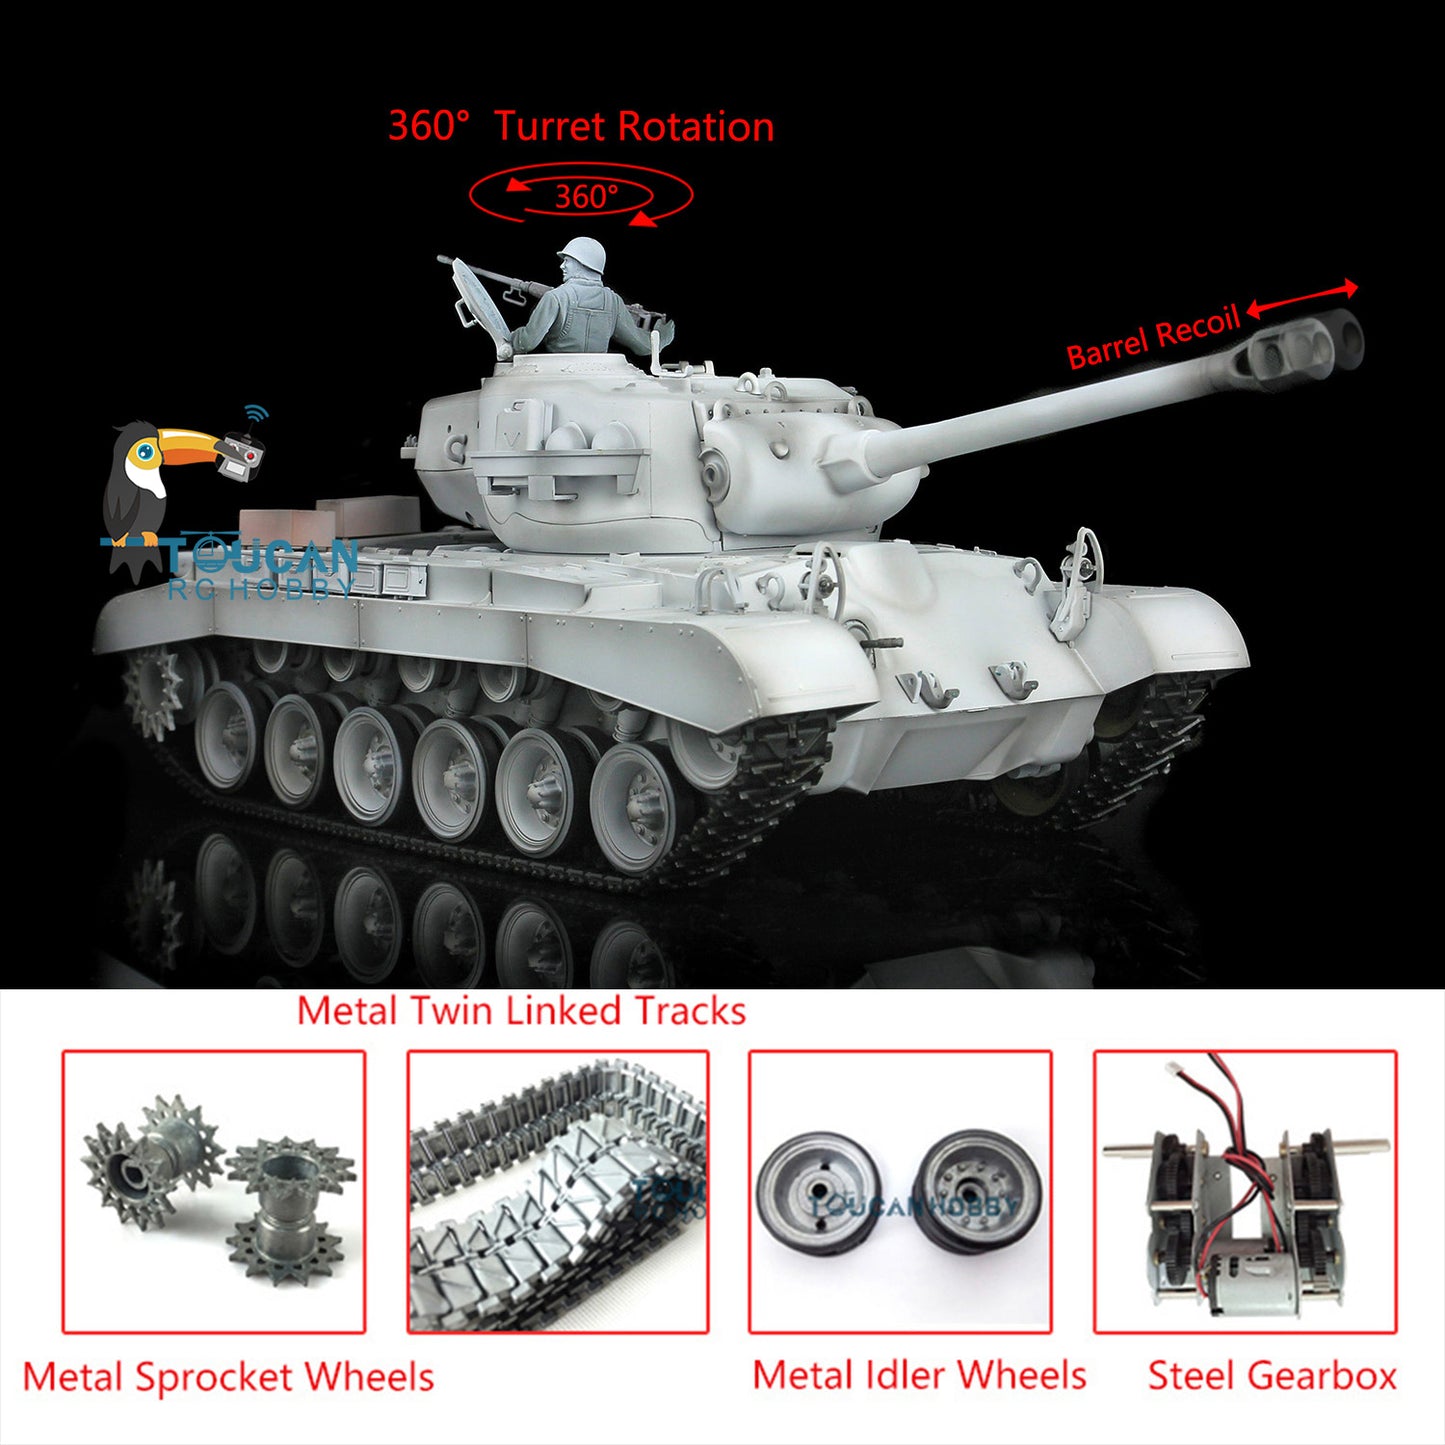 Henglong 1/16 7.0 Upgraded RC Tank 3838 USA M26 W/ Barrel Recoil 360Degrees Rotating Turret Metal Tracks w/ Double Rubber Pad Smoking